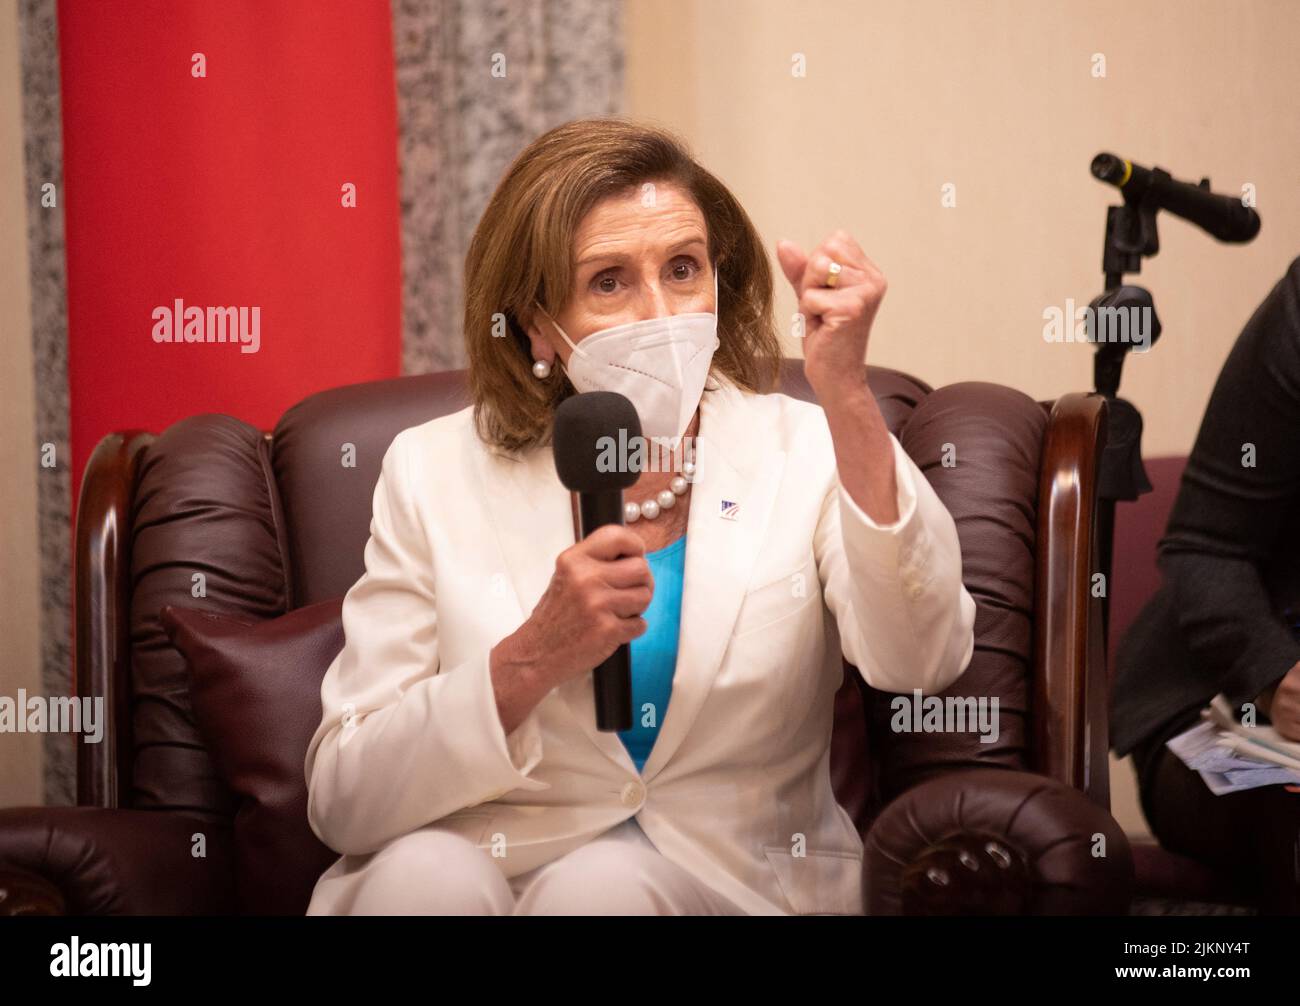 U.S. House of Representatives Speaker Nancy Pelosi attends a meeting with Legislative Yuan Vice President Tsai Chi-chang (not pictured) at the parliament in Taipei, Taiwan August 3, 2022. Central News Agency/Pool via REUTERS Stock Photo